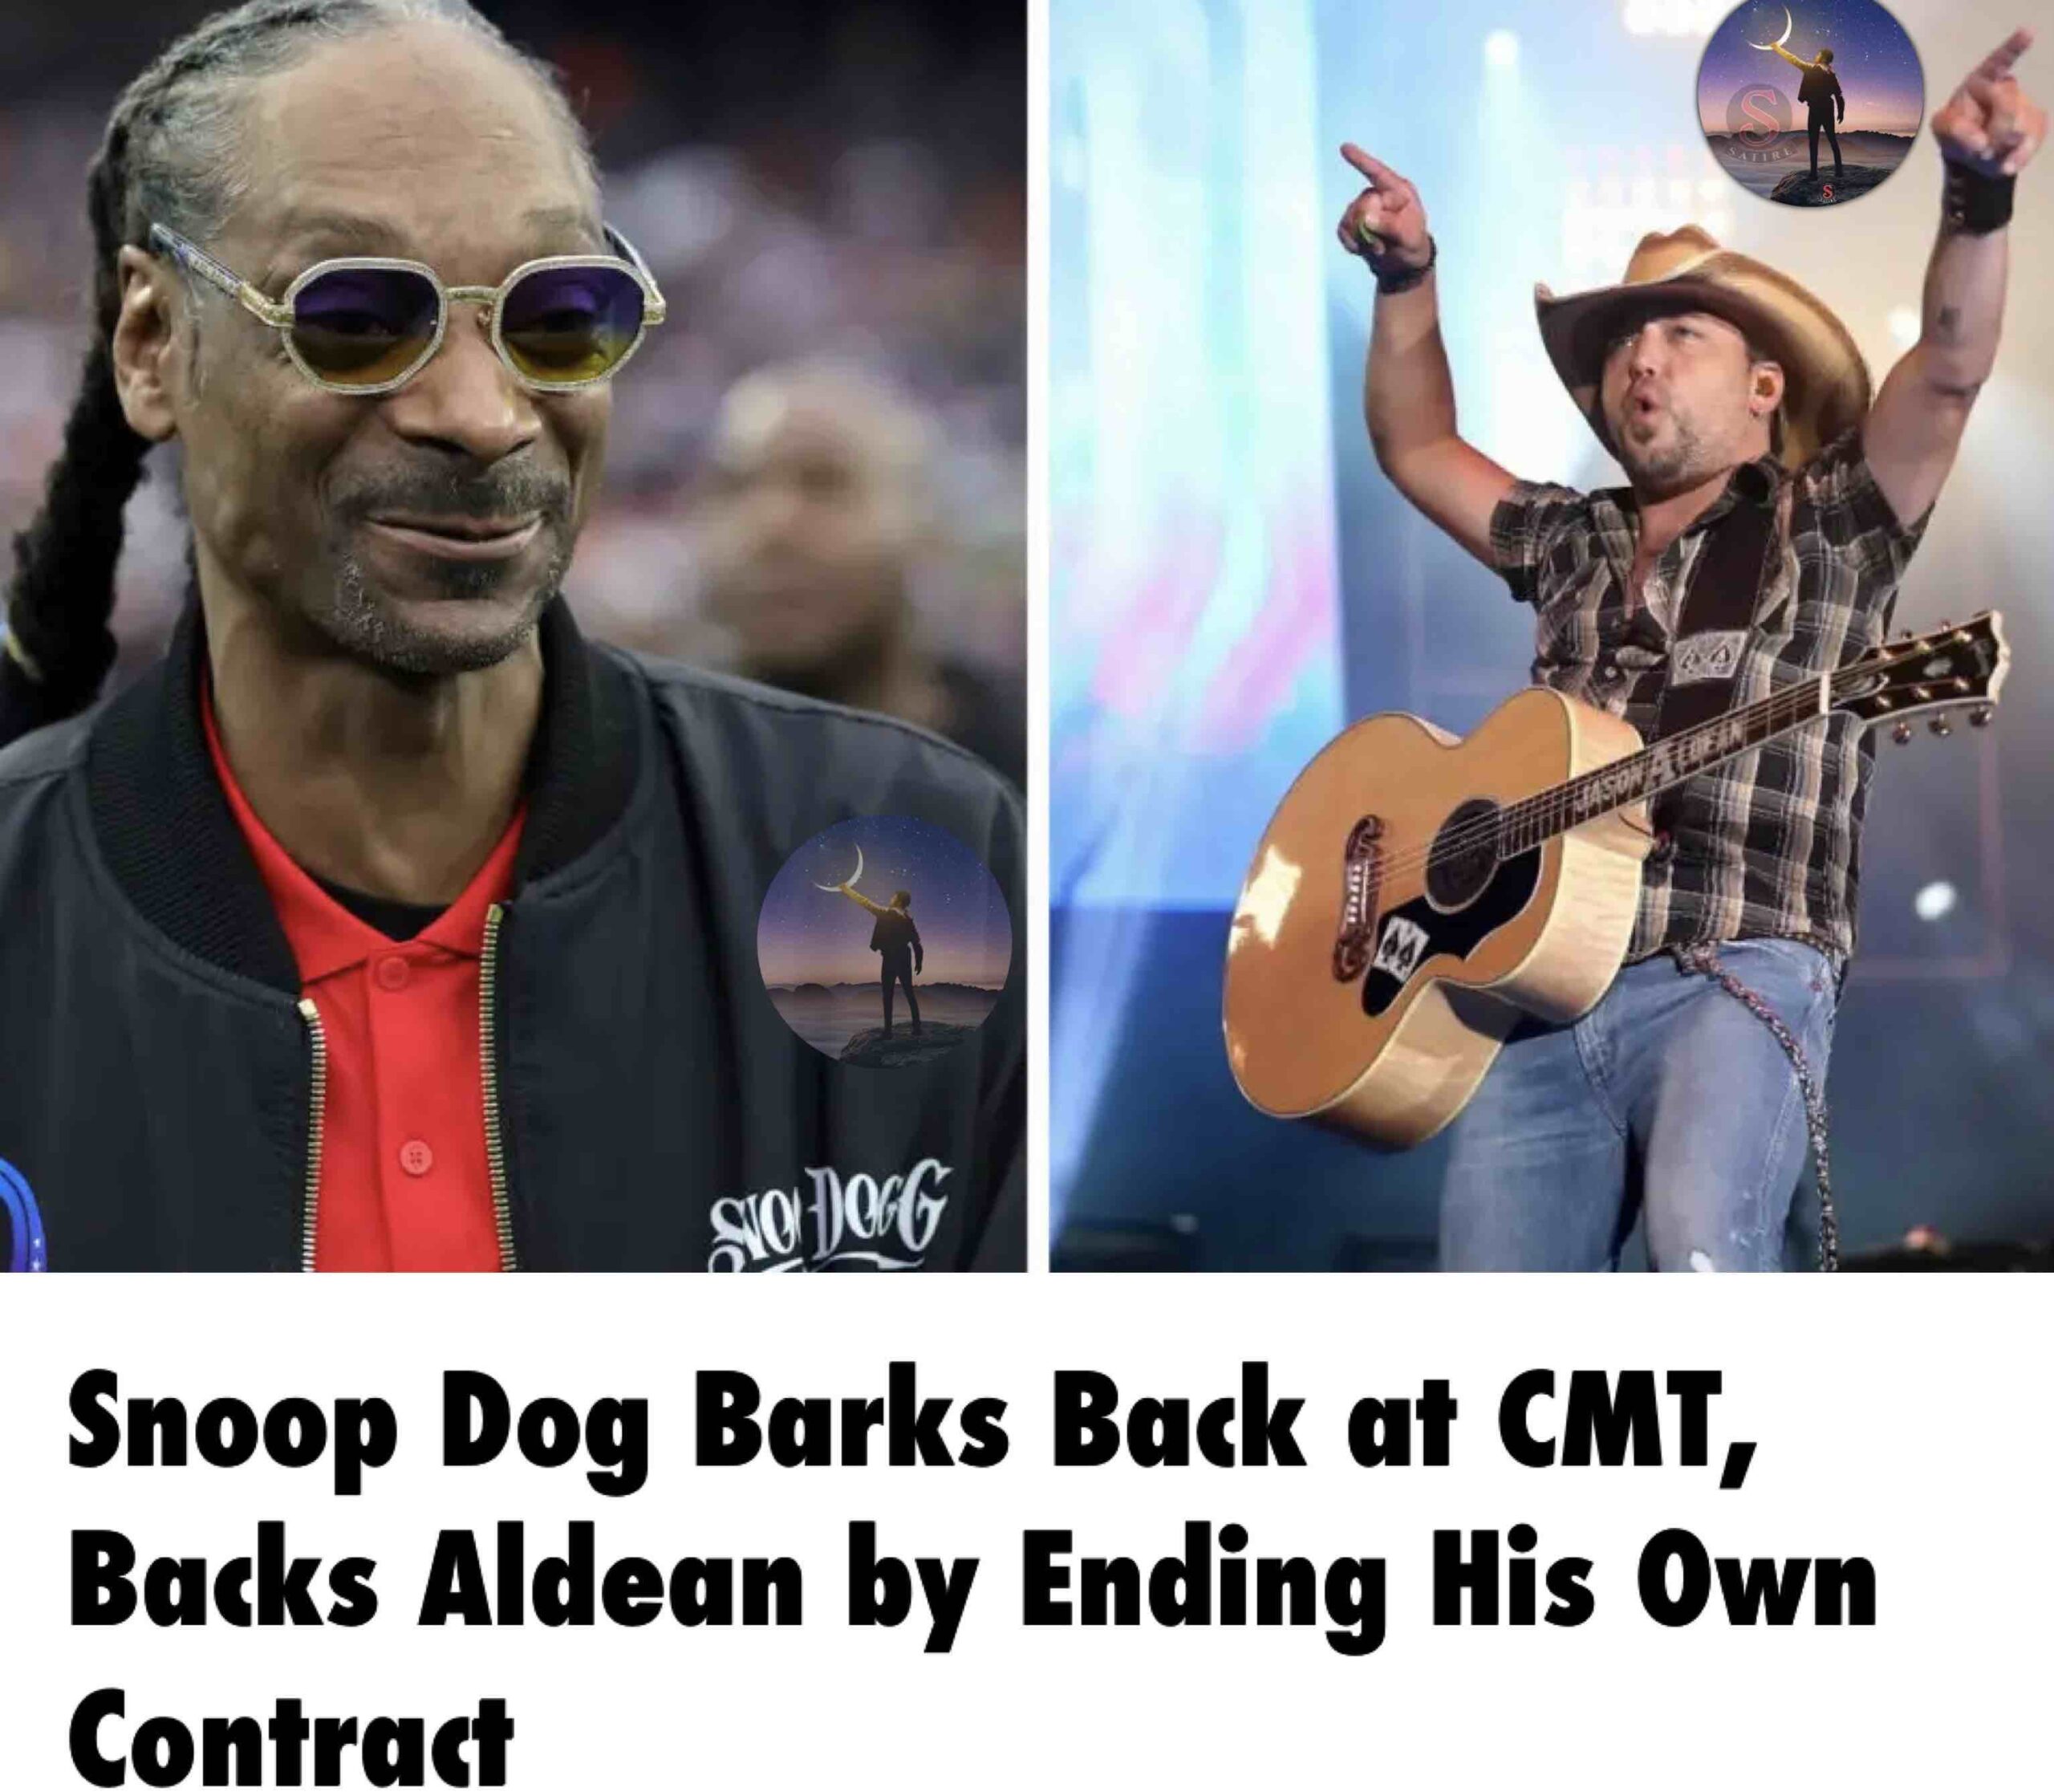 Breaking: Snoop Dog Barks Back at CMT, Backs Aldean by Ending His Own Contract